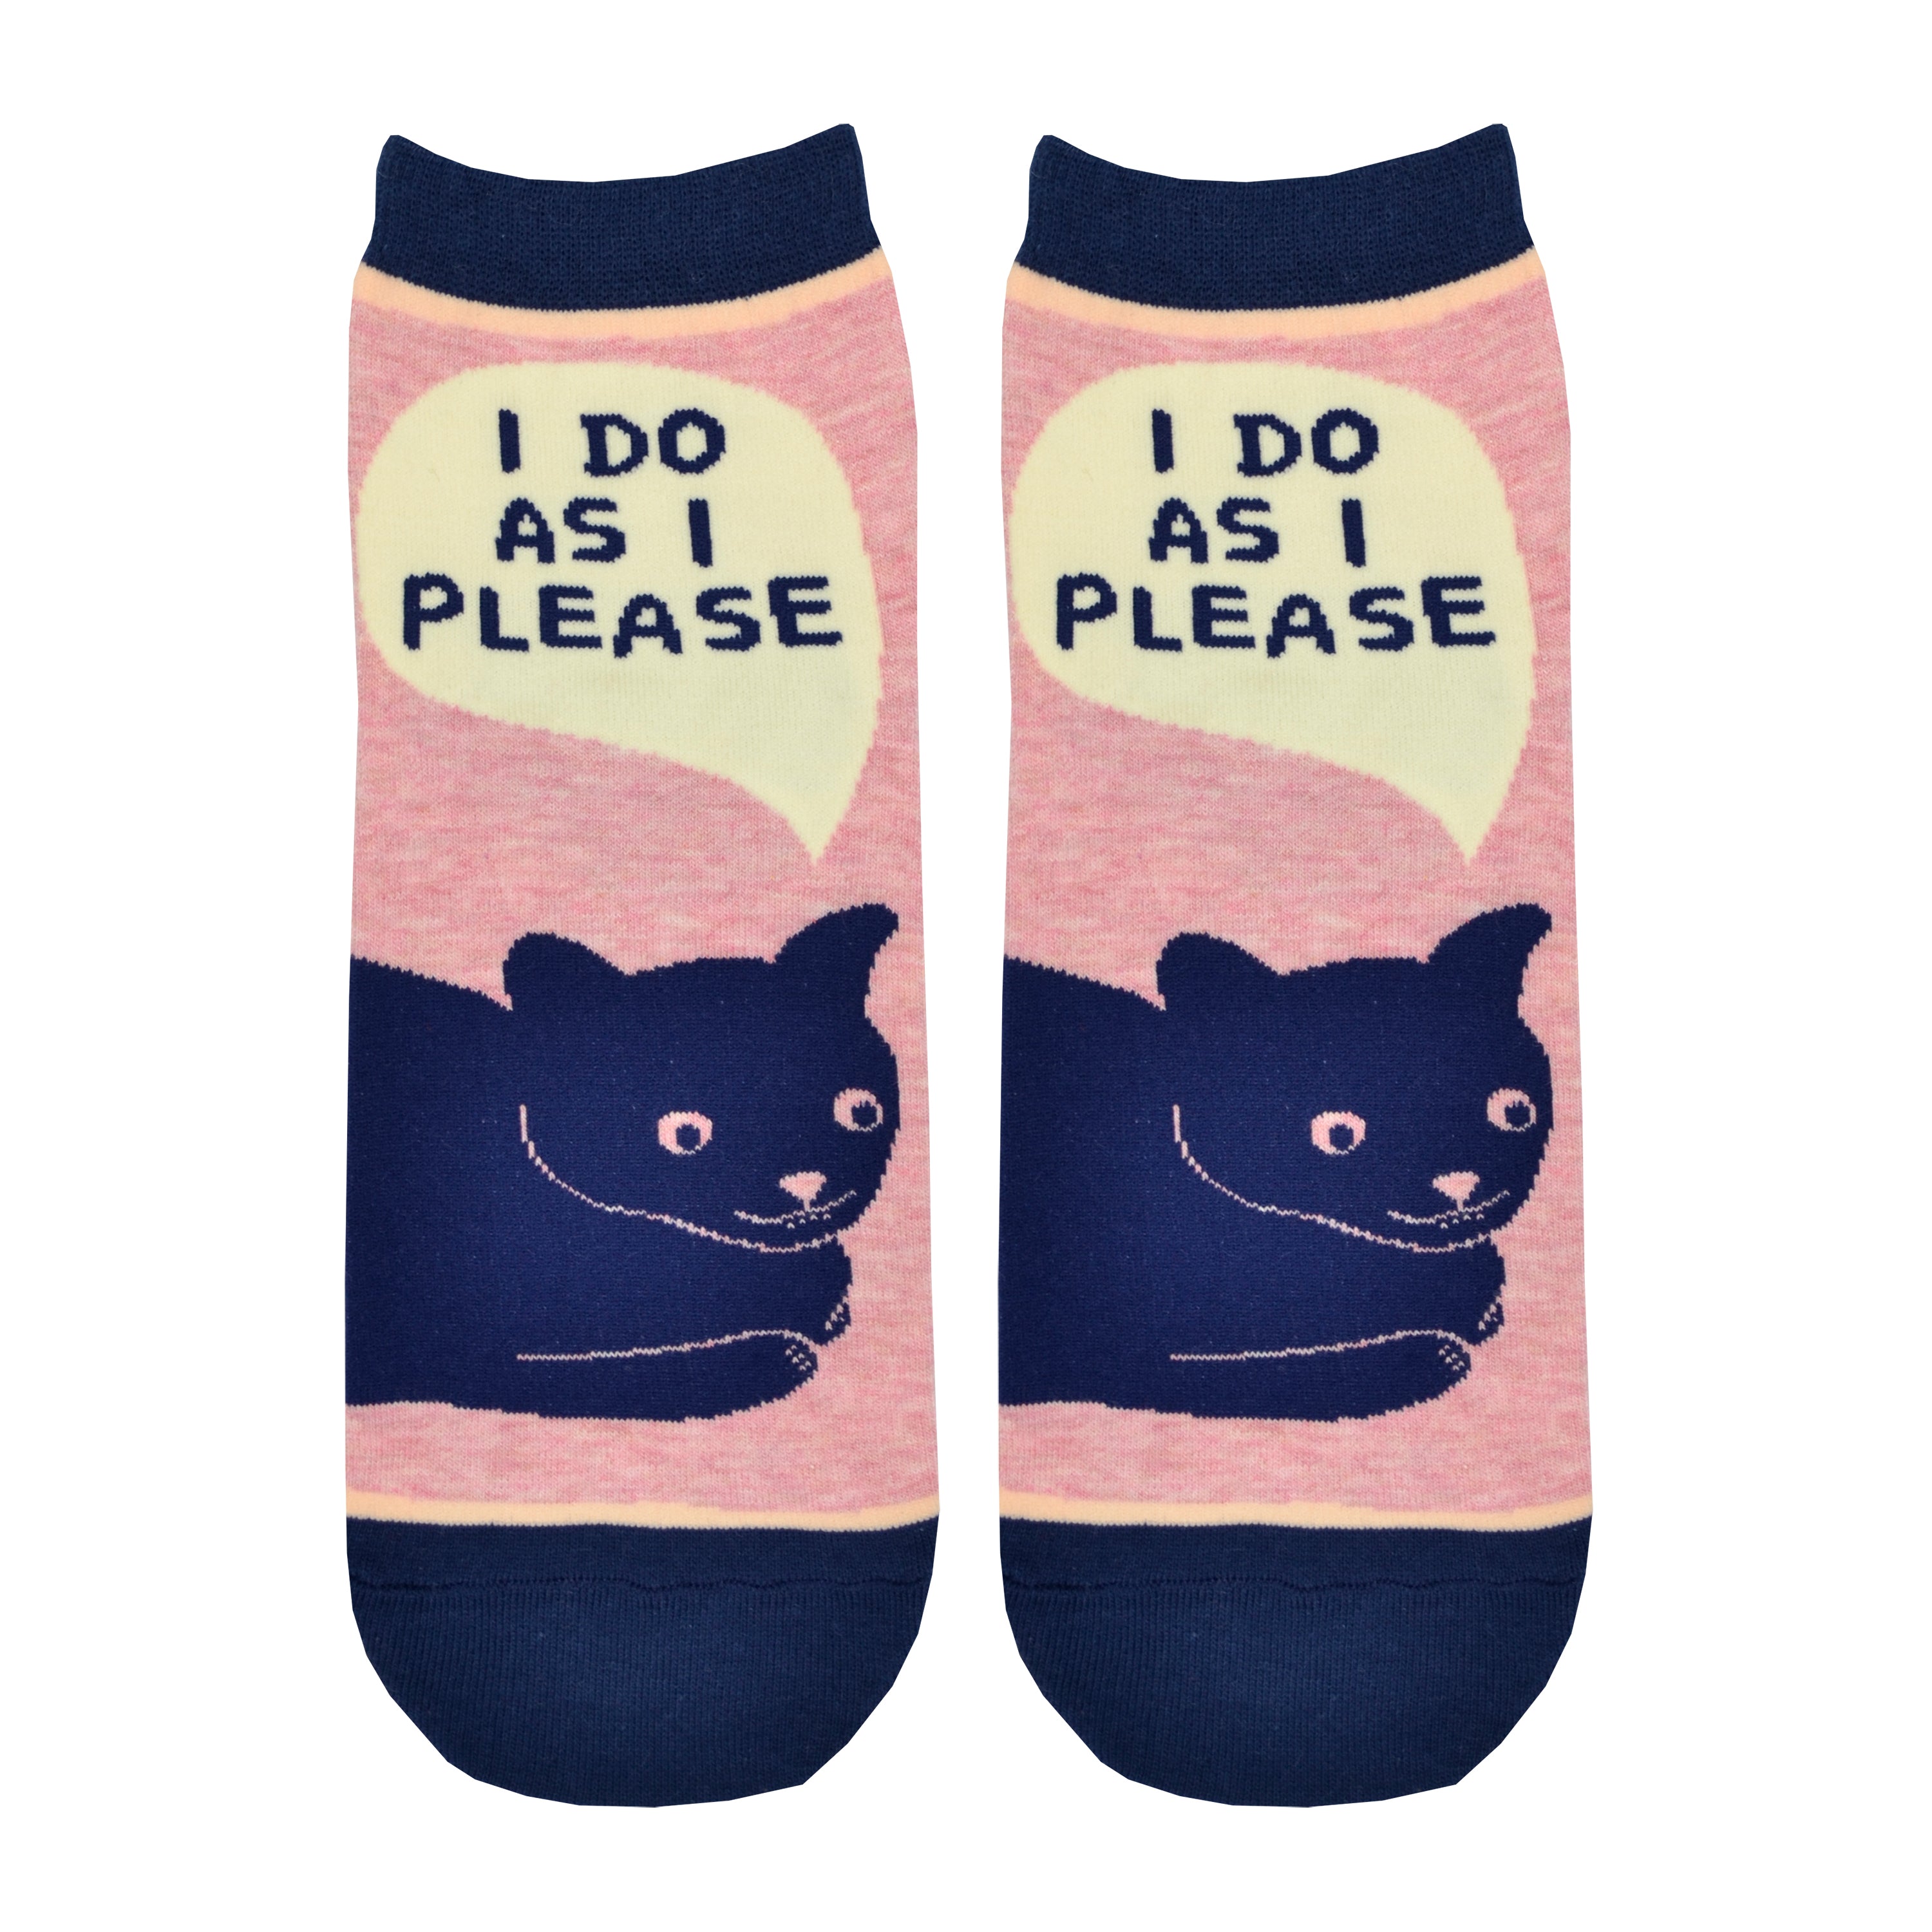 Shown in a flatlay, a pair of Blue Q brand women's ankle socks in light pink with a navy blue heel, toe, and cuff. The sock features a blue cartoon cat on the foot with the phrase, 